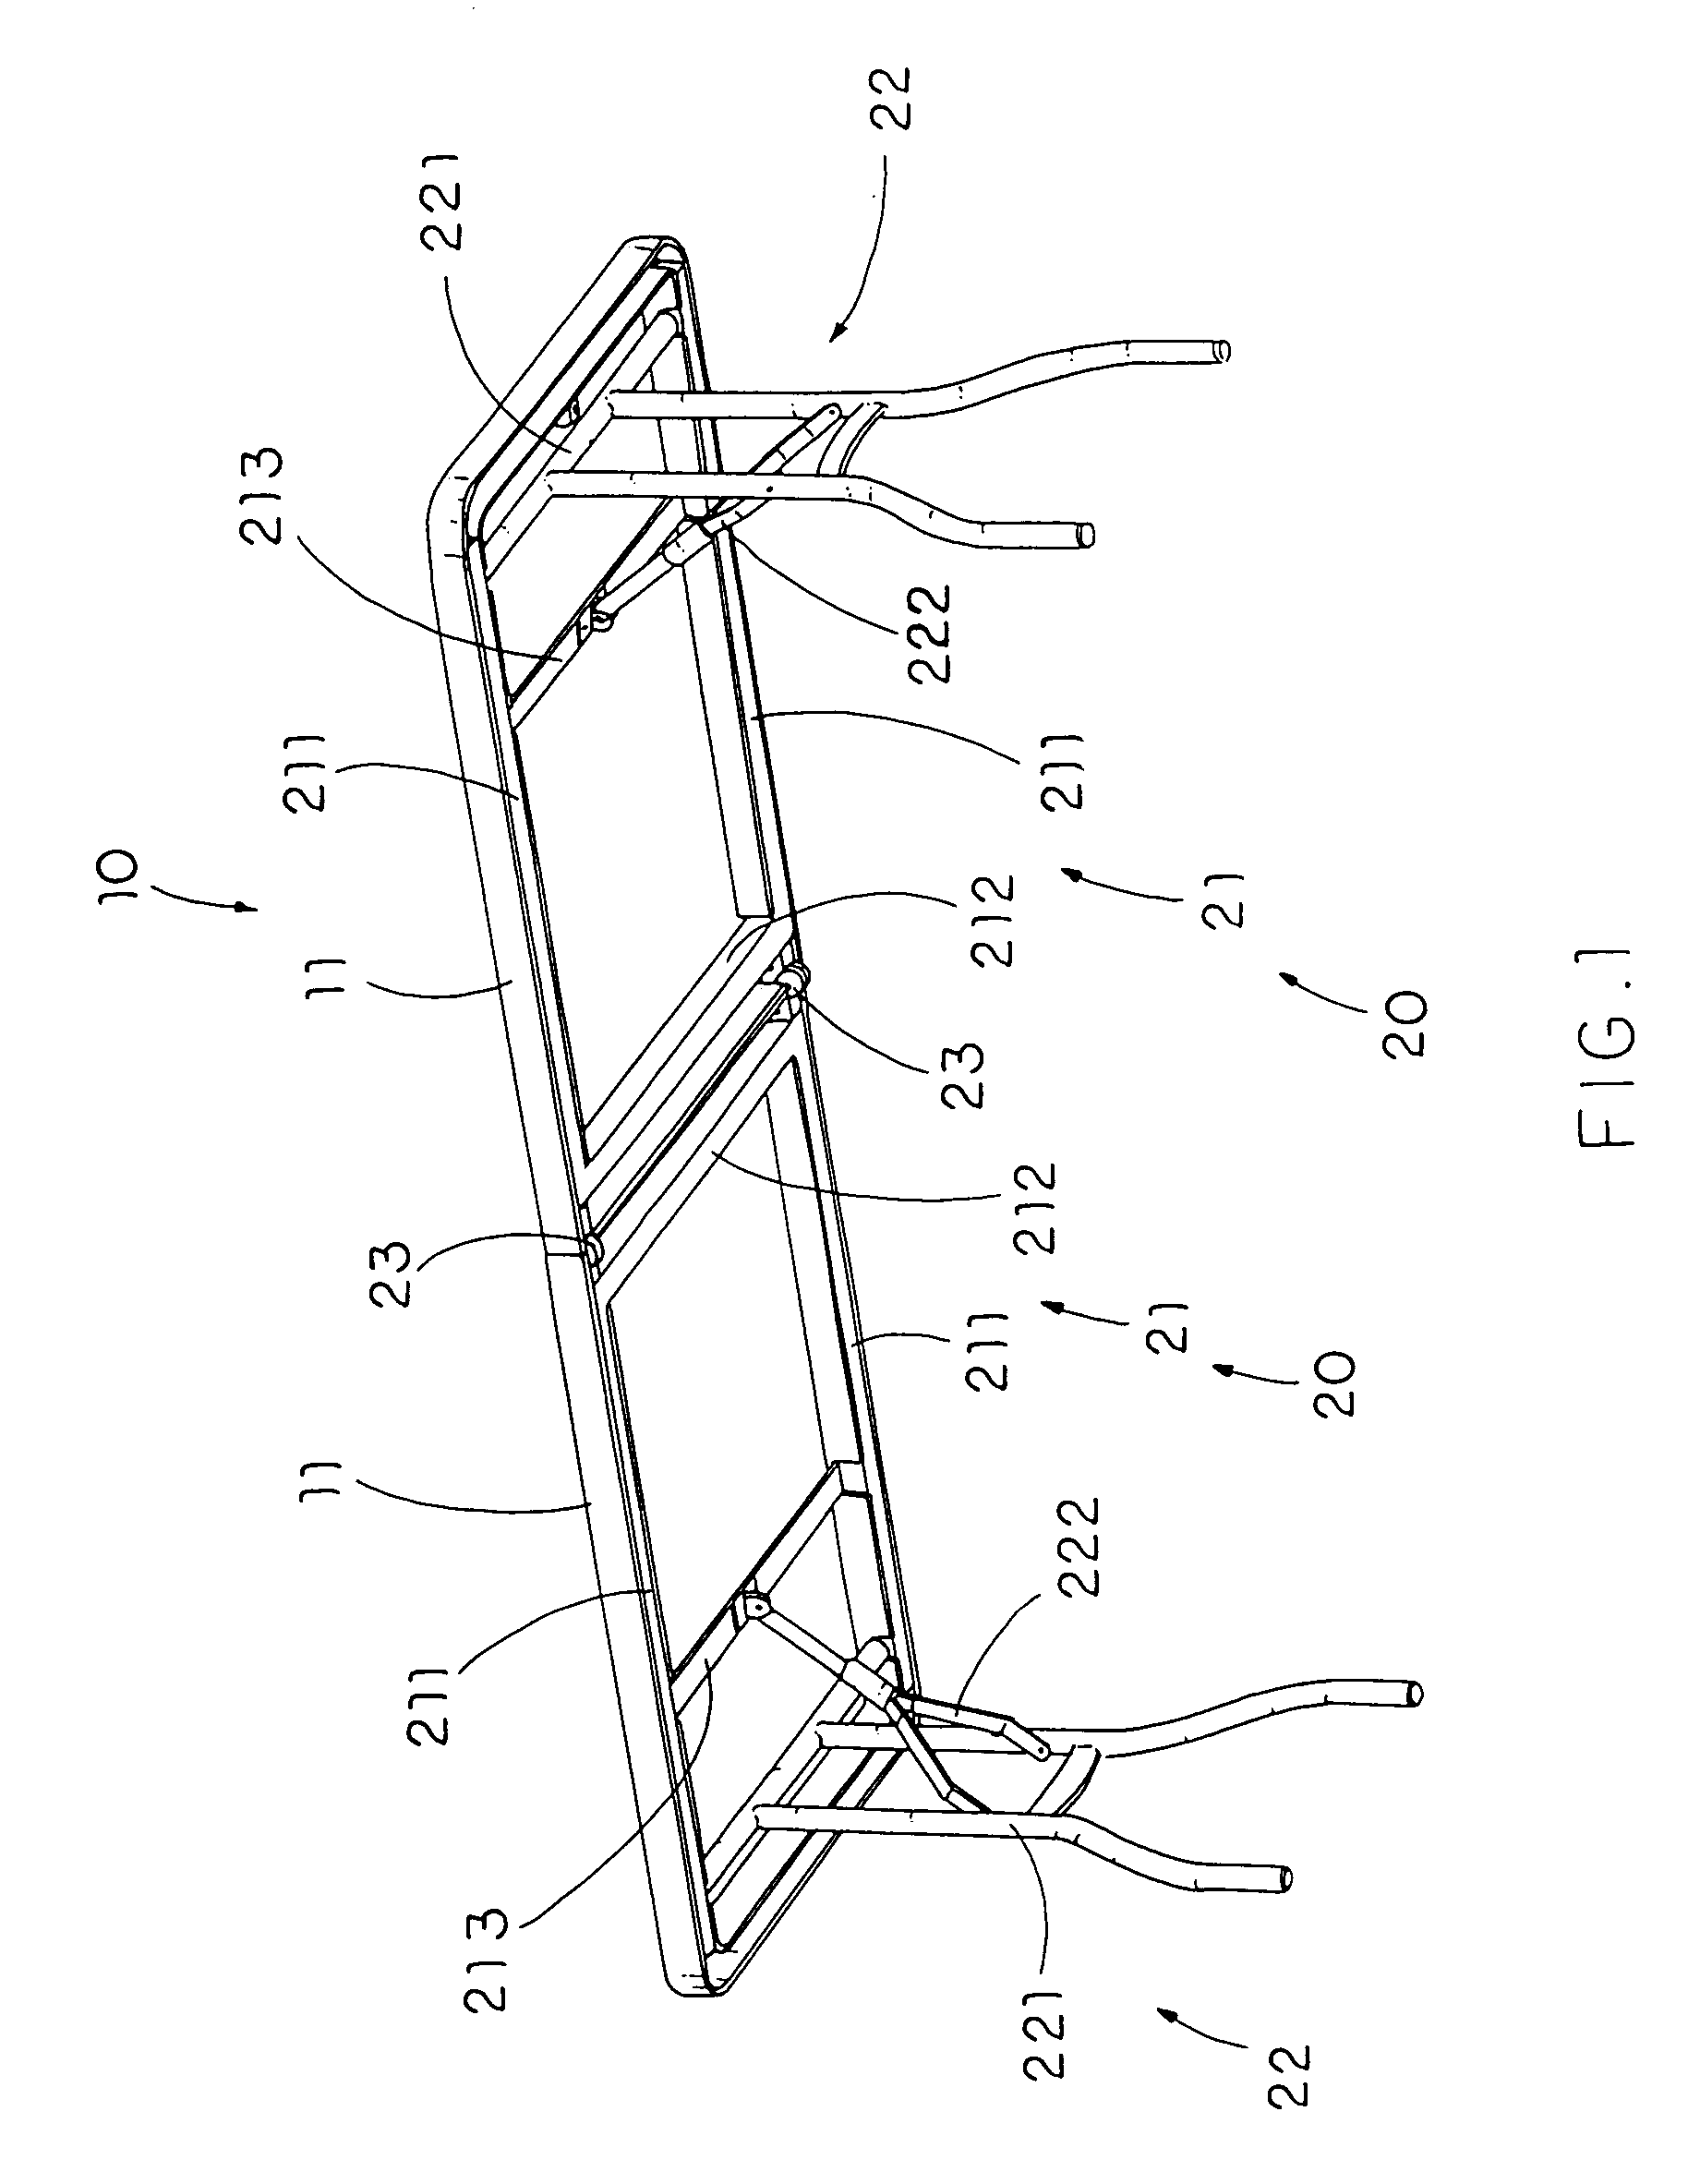 Foldable frame structure for foldable table